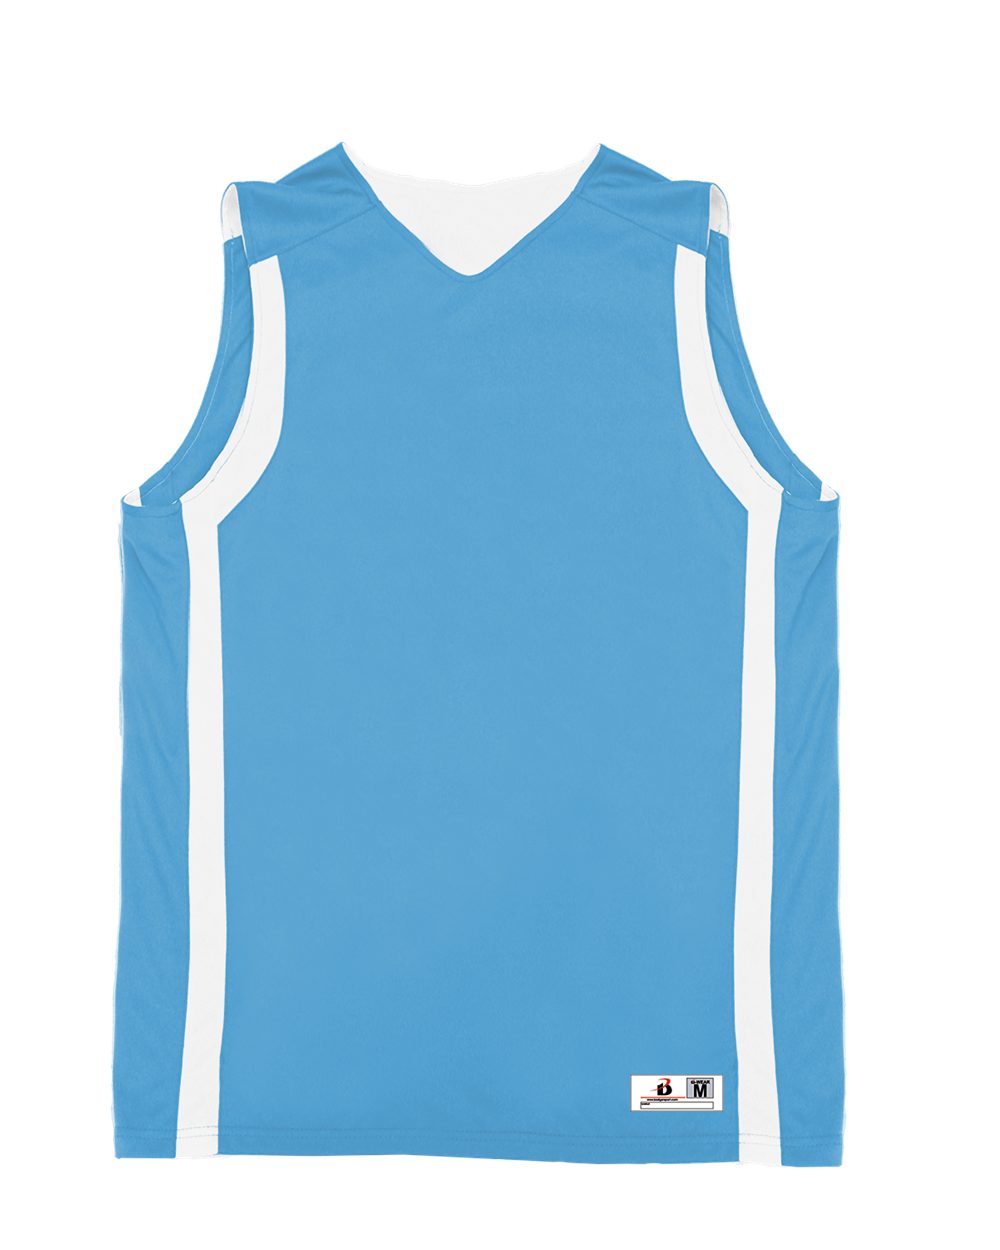 Womens and Girls Basketball Jerseys | SportsTeamsUS